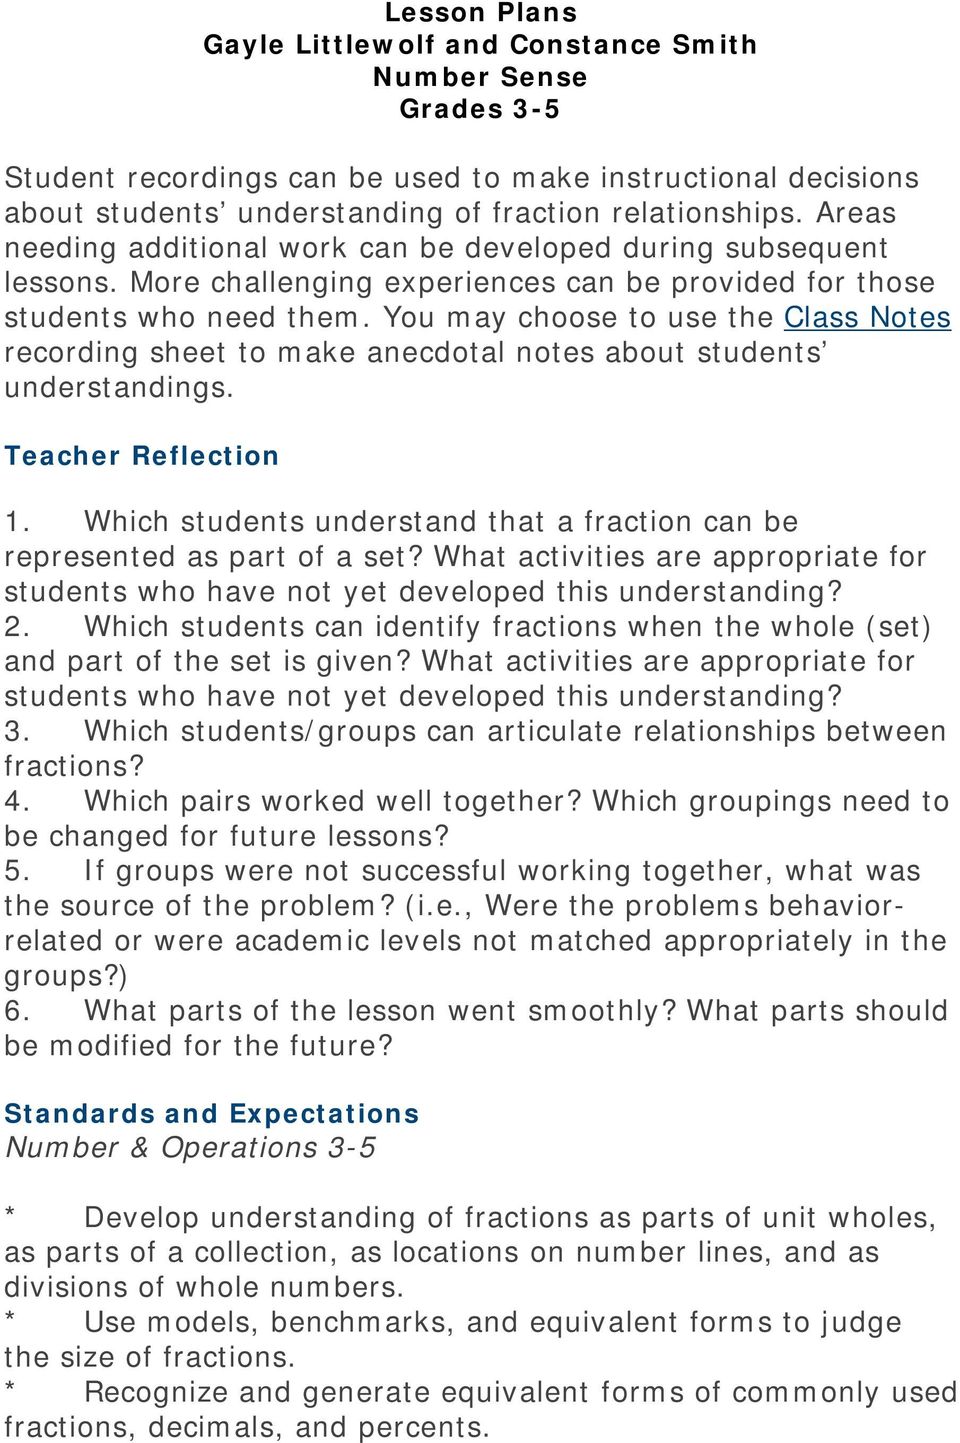 Teacher Reflection 1. Which students understand that a fraction can be represented as part of a set? What activities are appropriate for students who have not yet developed this understanding? 2.